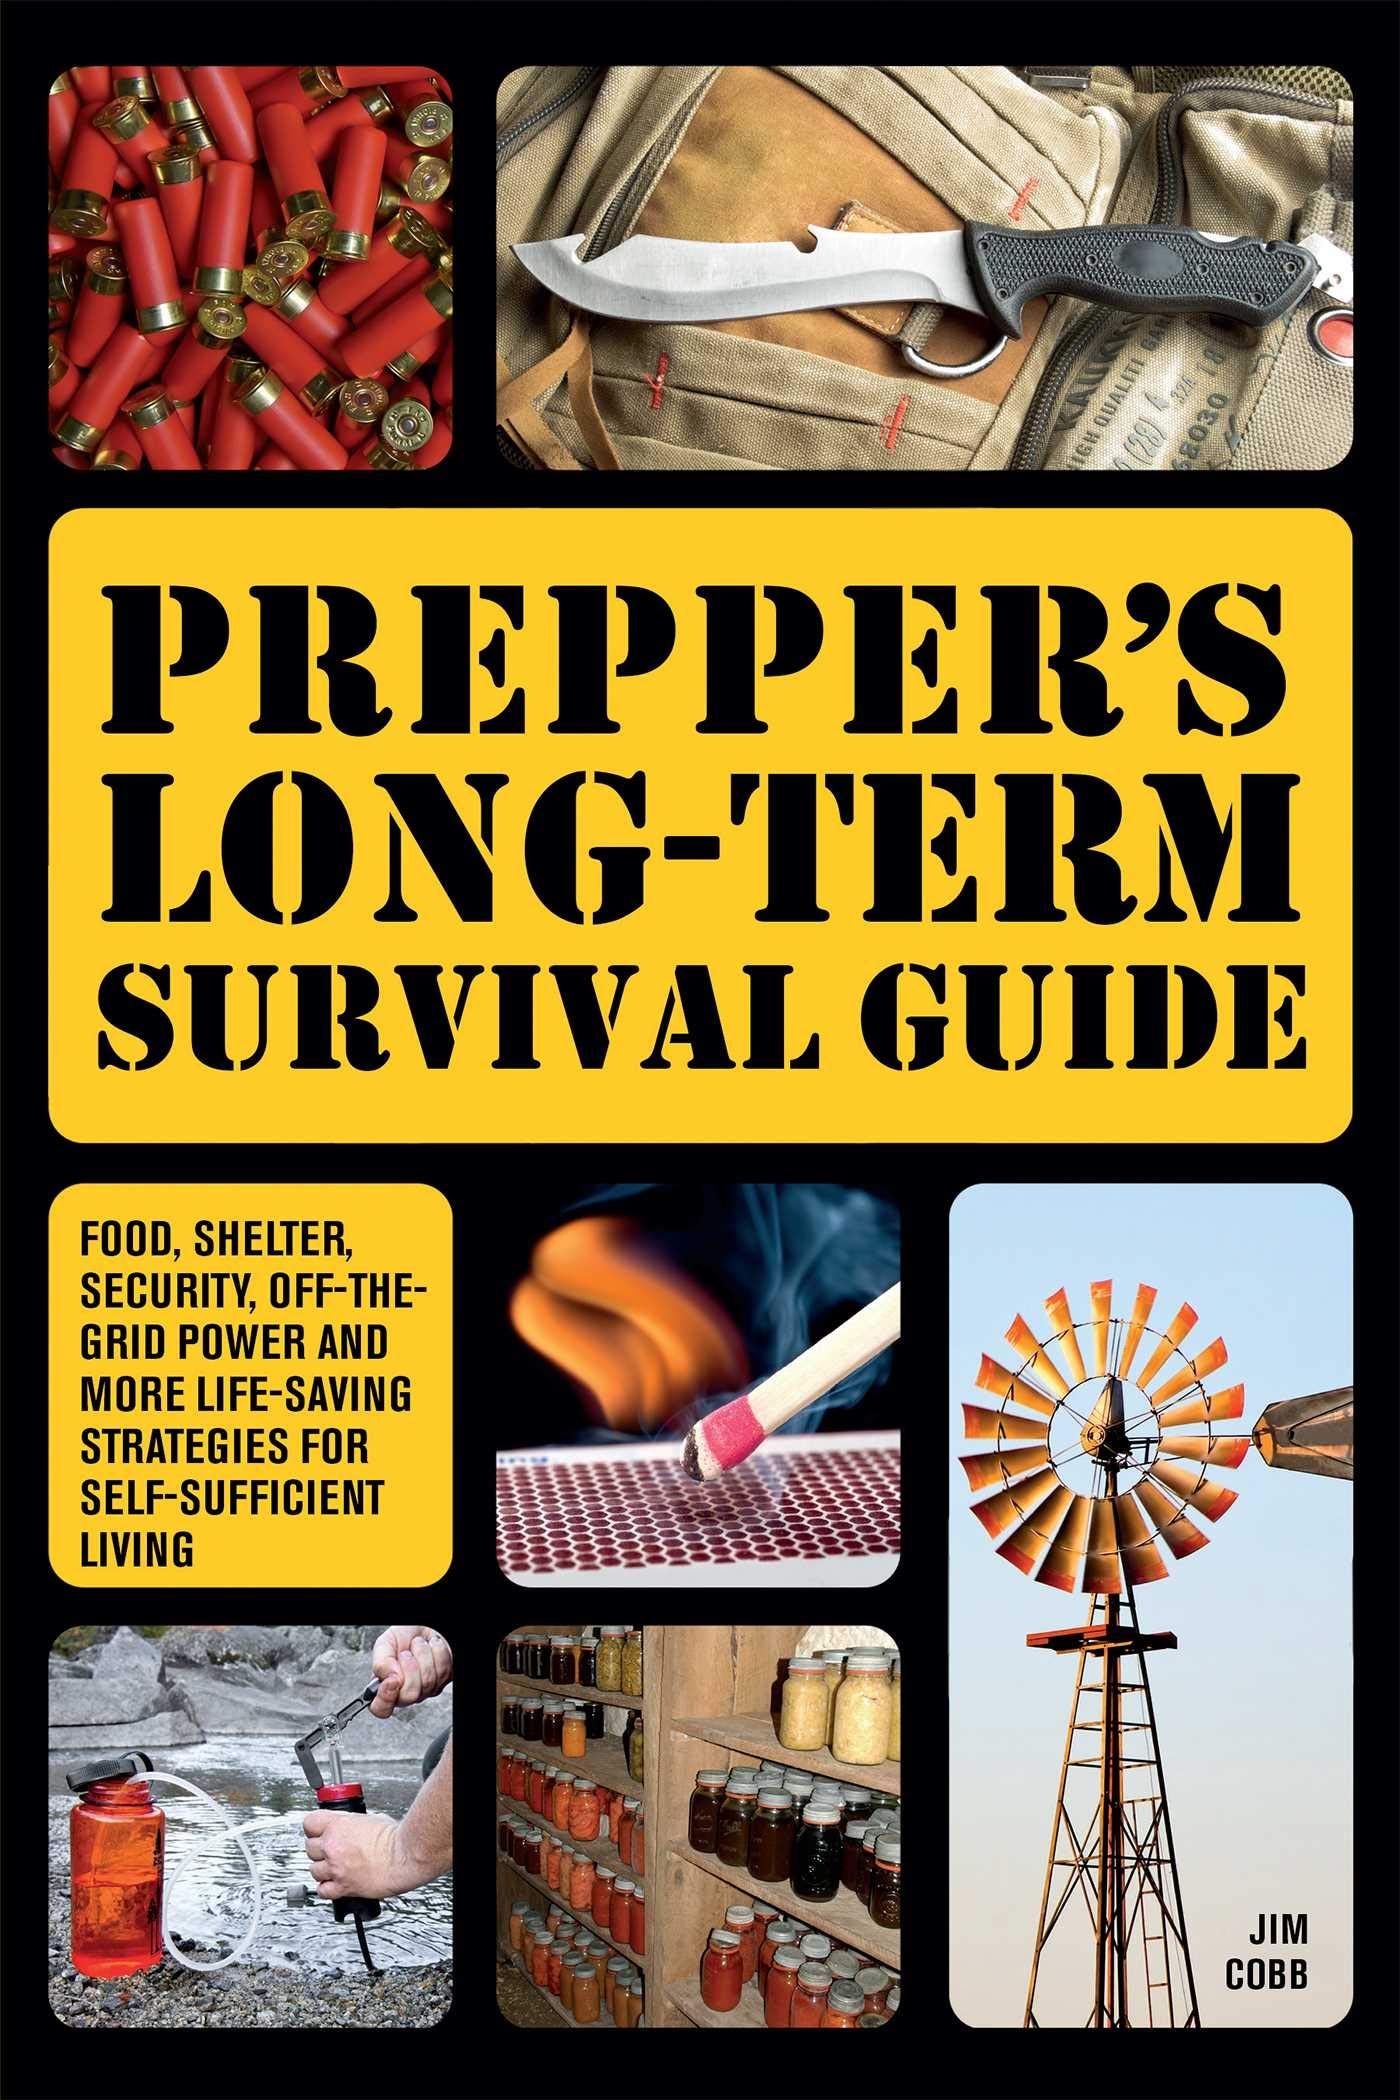 Prepper's Long-Term Survival Guide: Food, Shelter, Security, Off-the-Grid Power and More Life-Sav... | Amazon (US)